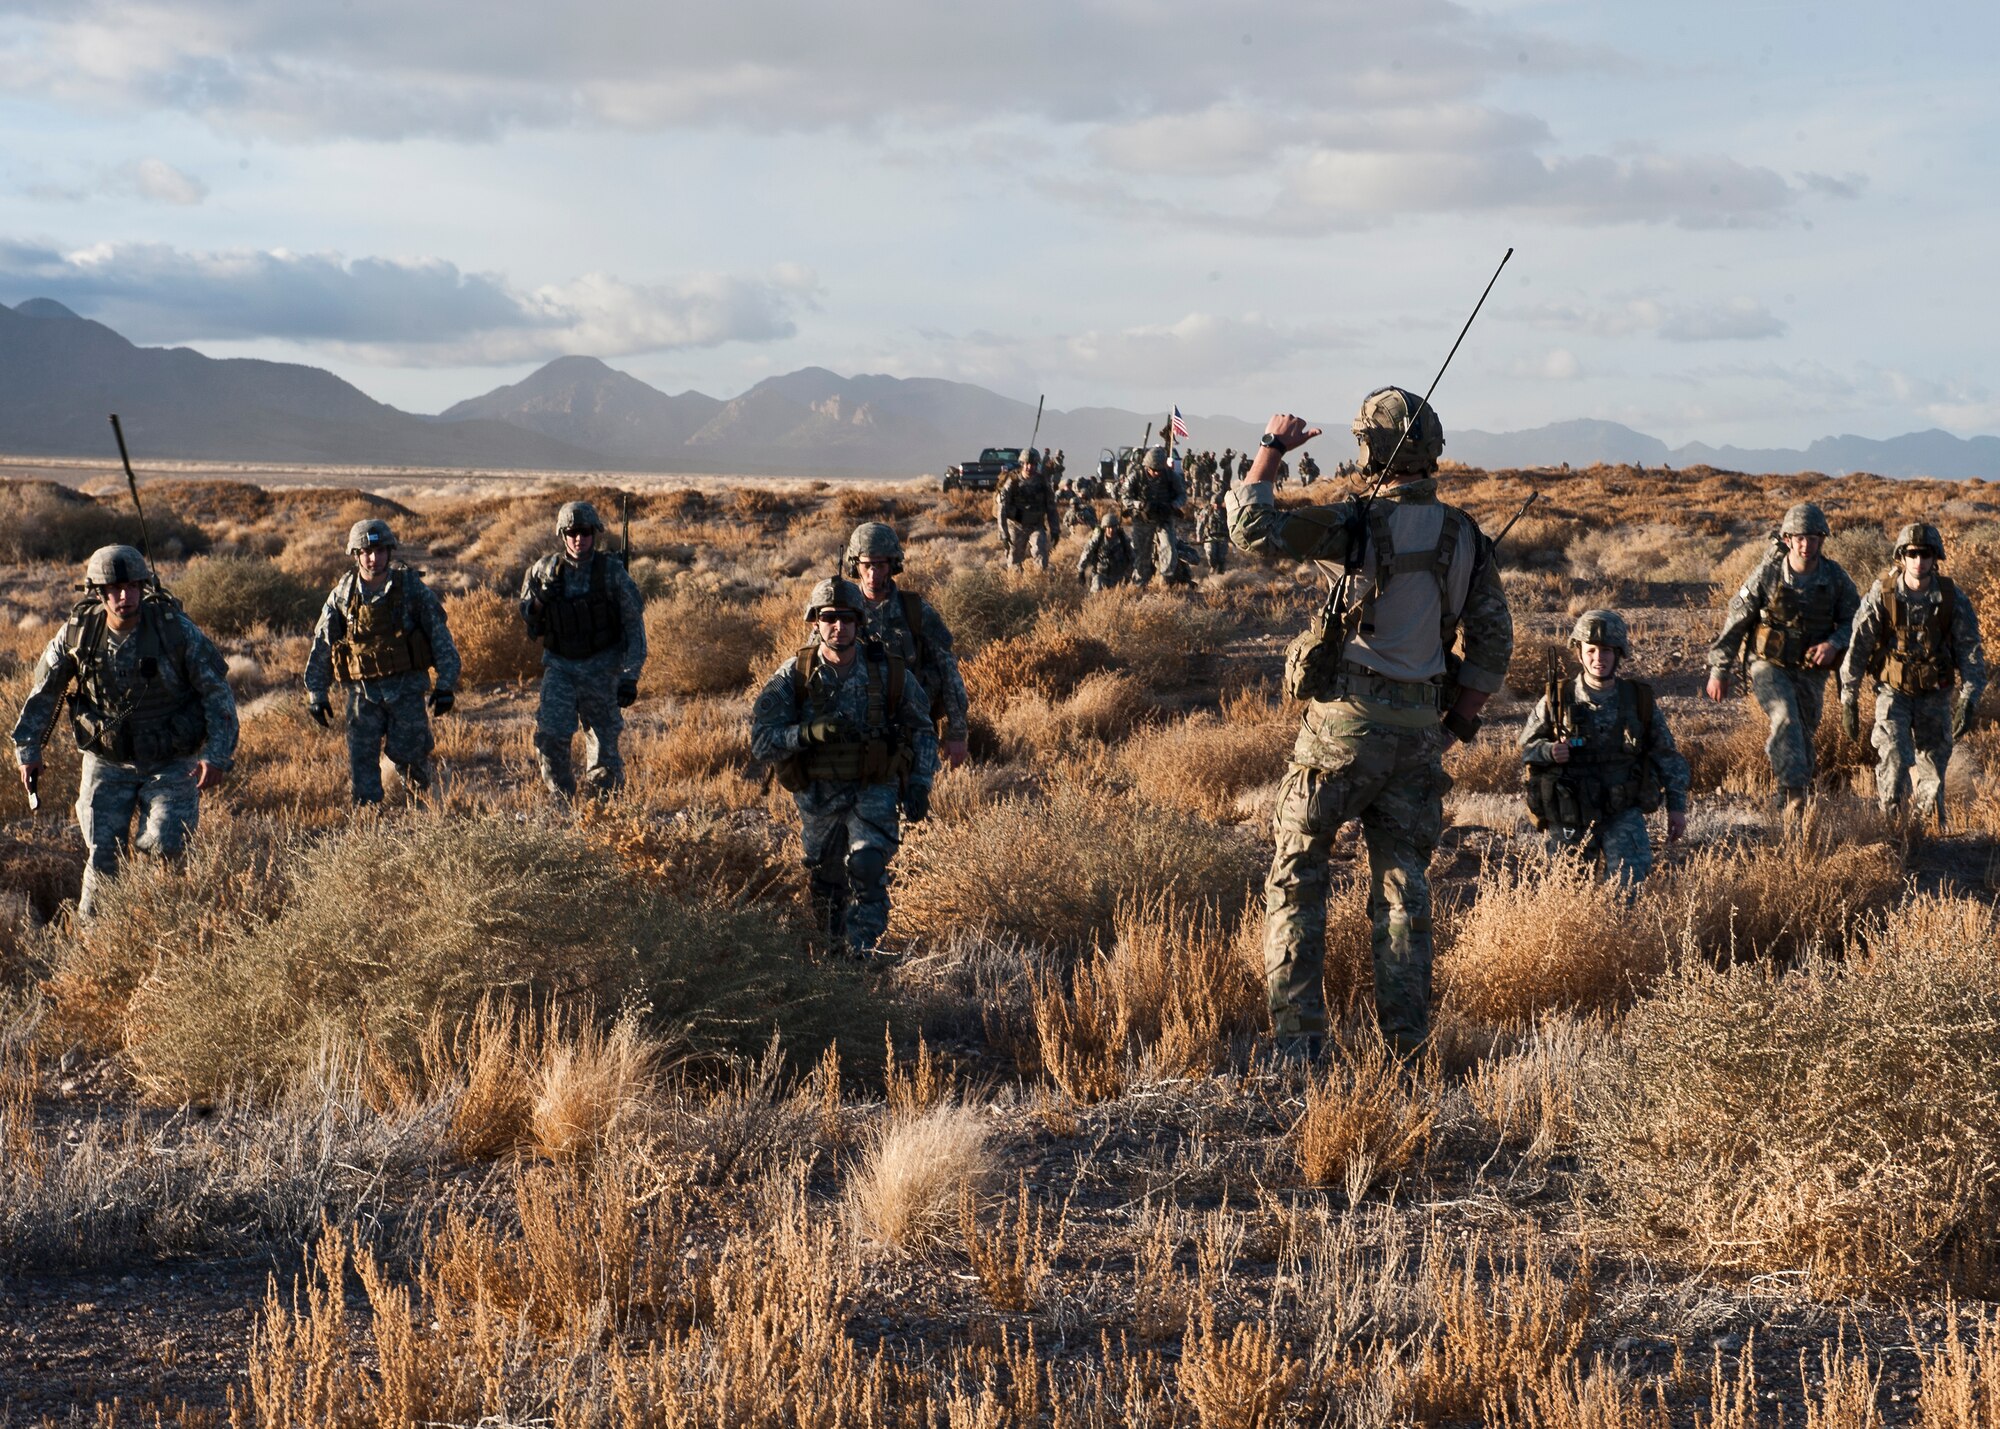 A Joint Terminal Attack Controller directs paratroopers assigned to the 3rd Brigade Combat Team, 82nd Airborne Division, Fort Bragg, N.C., to their rally point during the U.S. Air Force Weapons School's Joint Forcible Entry Exercise 14B on the Nevada Test and Training Range, Dec. 6, 2014. Paratroopers jumped from multiple C-17 Globemaster IIIs and C-130 Hercules to secure a simulated airfield. (U.S. Air Force photo by Staff Sgt. Victoria Sneed)